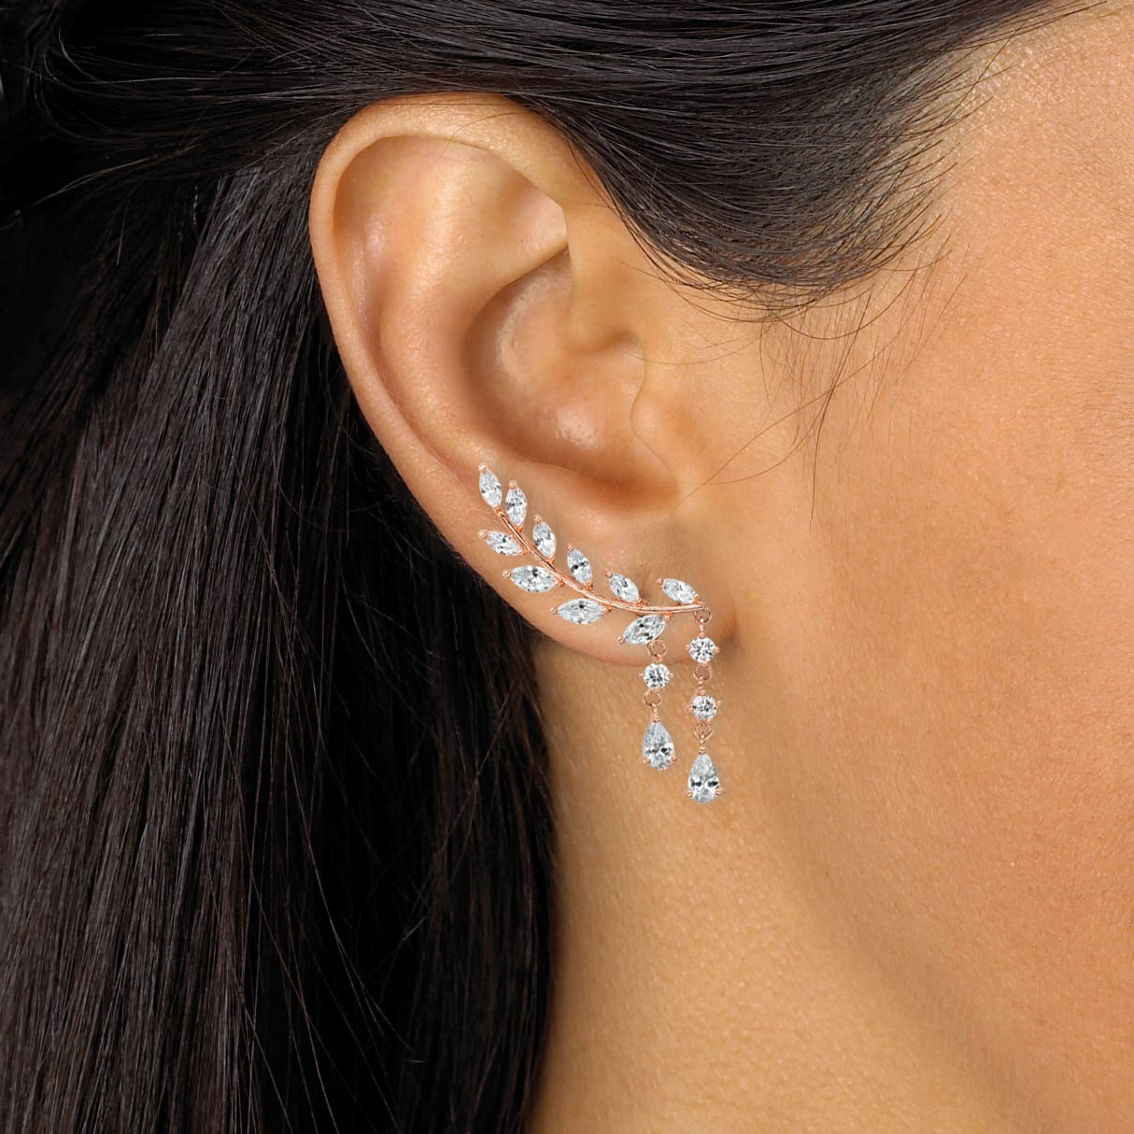 PalmBeach White Crystal Leaf and Ear Climber Earrings Rose Gold-Plated - Image 3 of 4